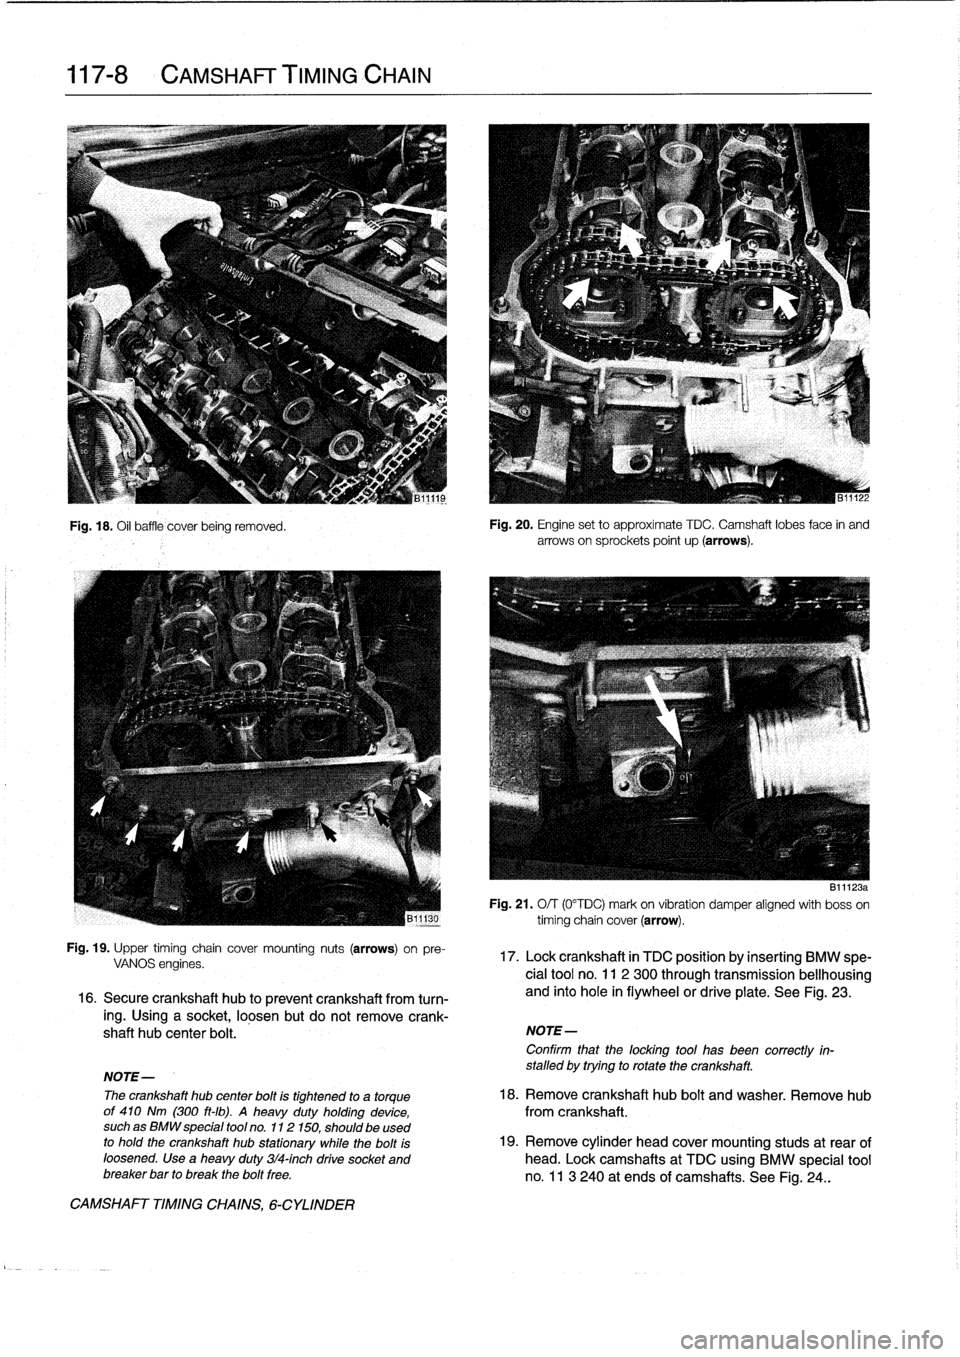 BMW 318i 1992 E36 Workshop Manual 
117-
8

	

CAMSHAFT
TIMING
CHAIN

Fig
.
18
.
Oil
baffle
cover
being
removed
.

Fig
.
19
.
Upper
timing
chaincover
mounting
nuts
(arrows)
on
pre-
VANOS
engines
.

16
.
Secure
crankshaft
hub
to
preven